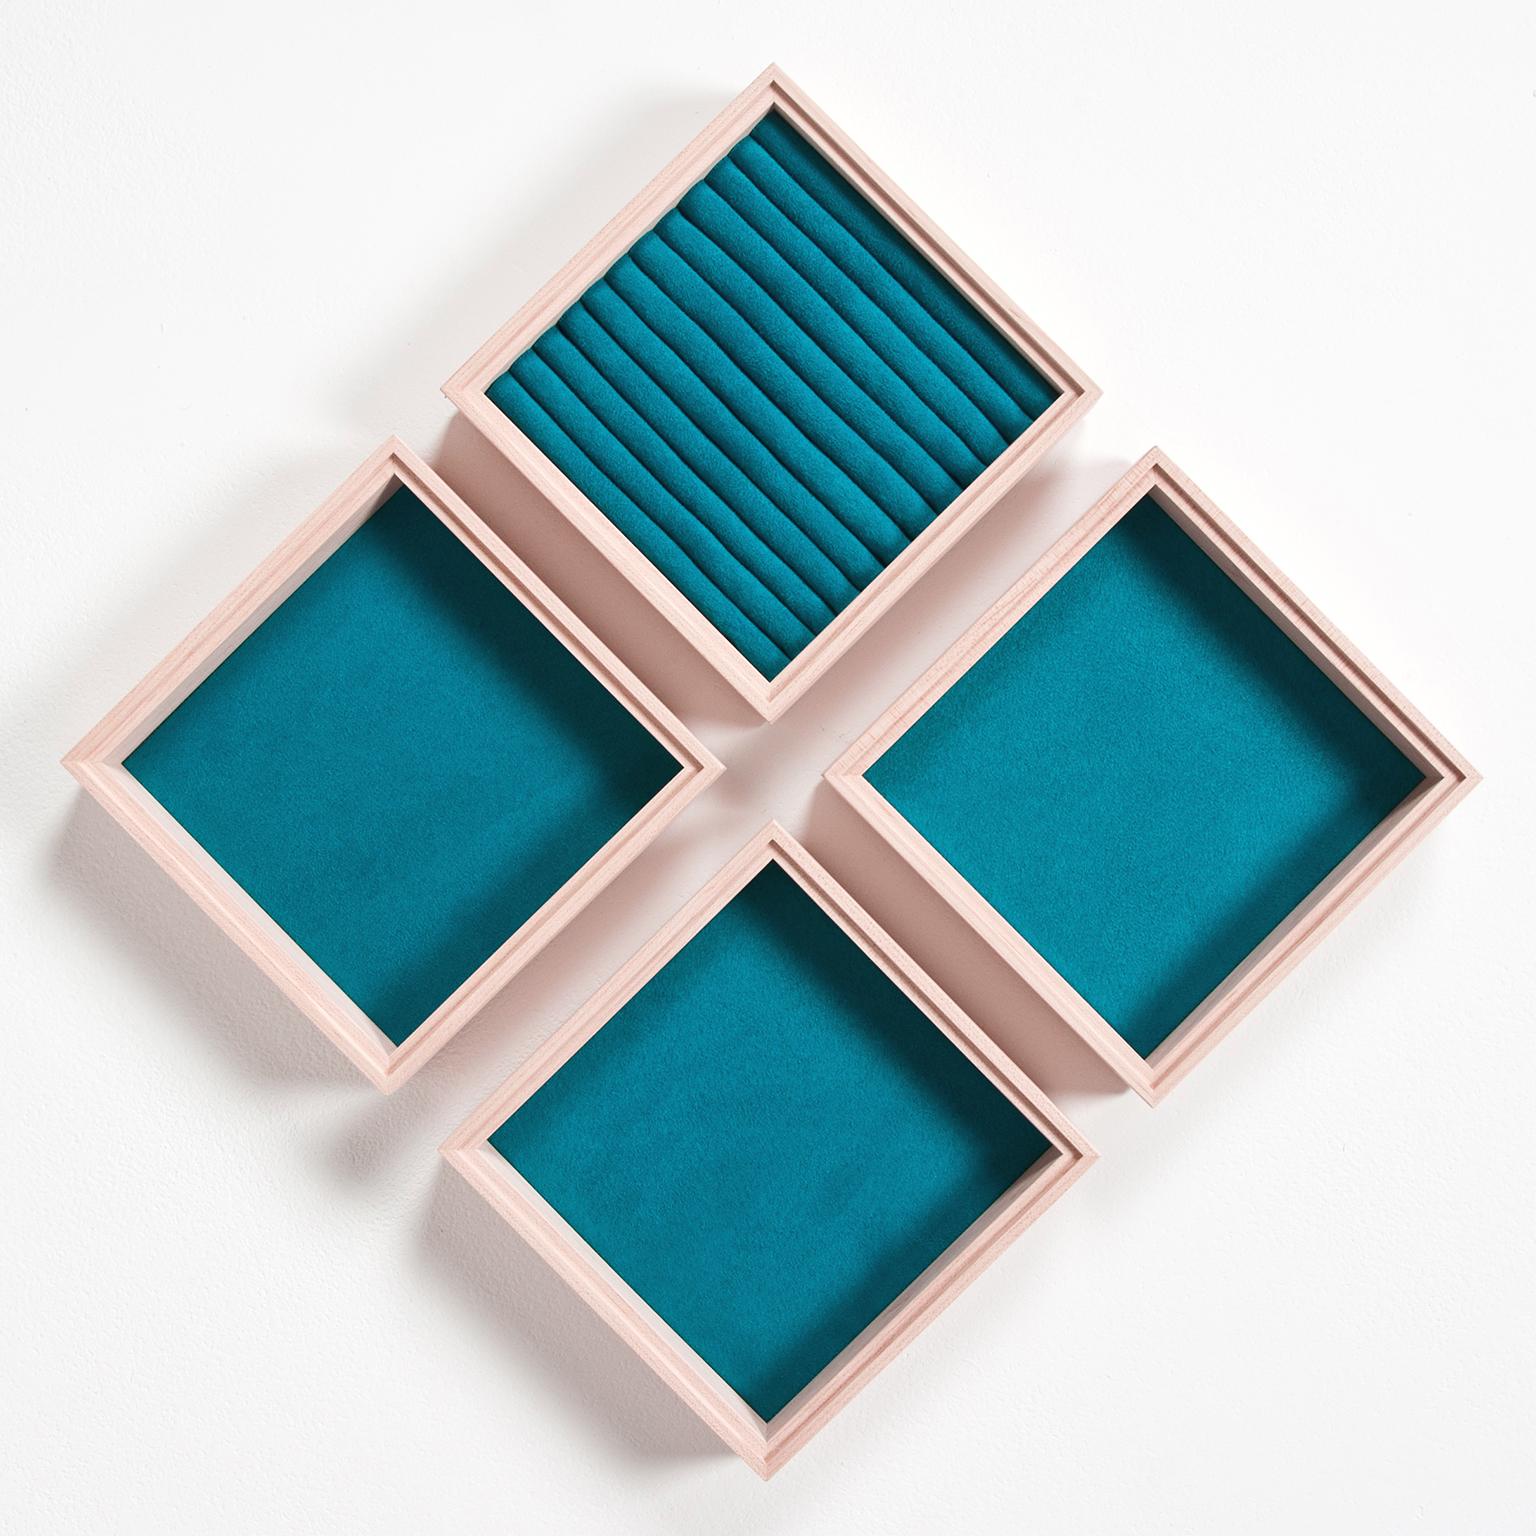 Hand-Crafted Contemporary Cubed Jewellery Box Made in Elm and Maple with Teal Fabric For Sale